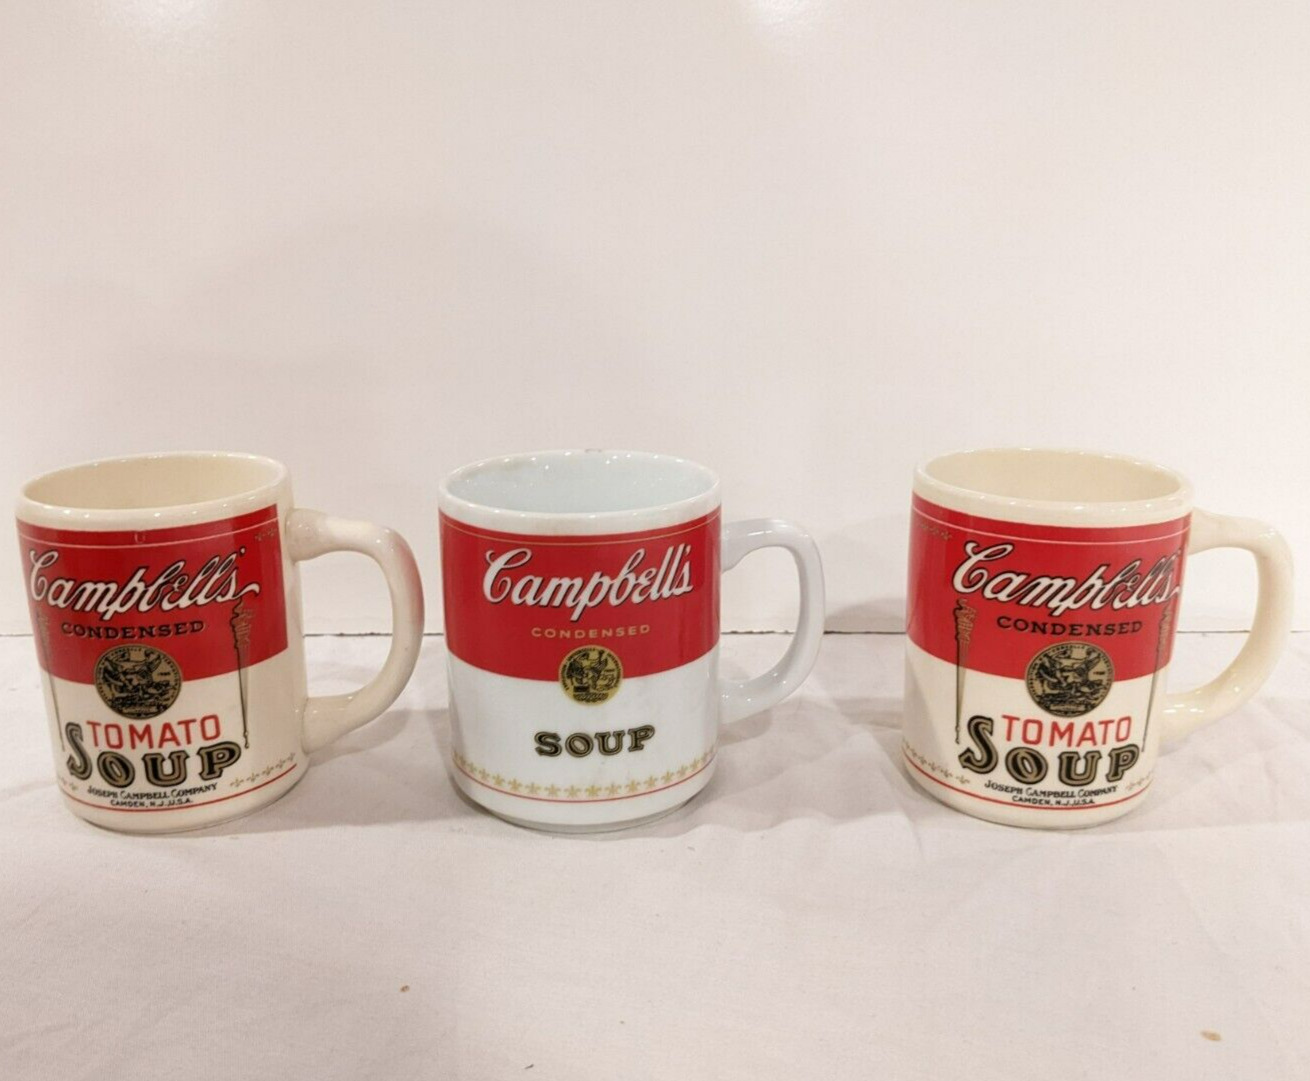 Lot of 3 Vintage Campbell's Tomato Soup Ceramic Mugs